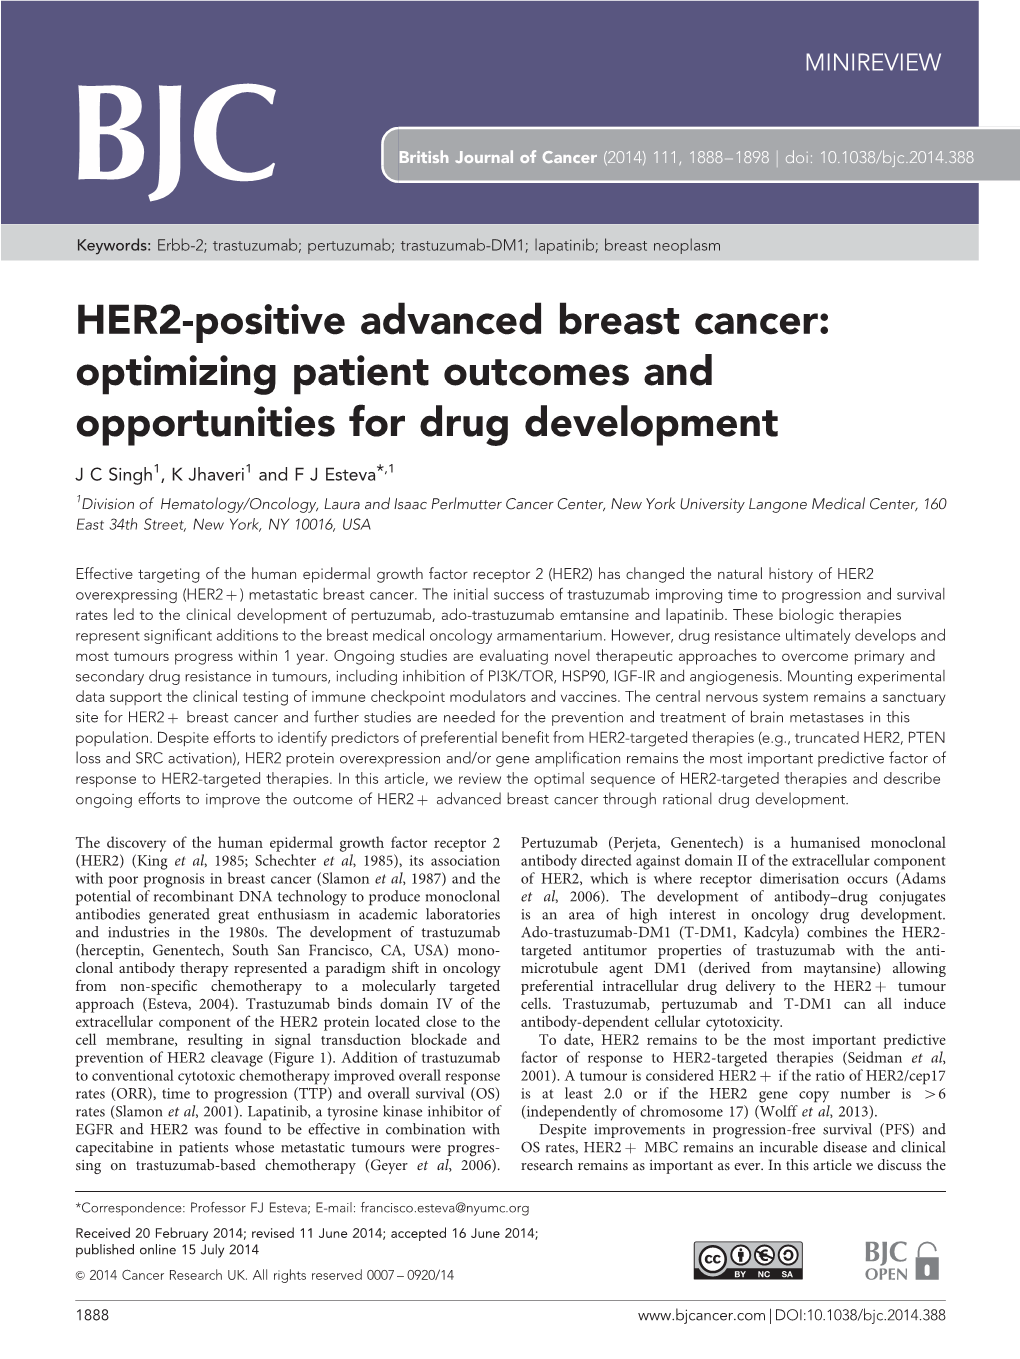 HER2-Positive Advanced Breast Cancer: Optimizing Patient Outcomes and Opportunities for Drug Development